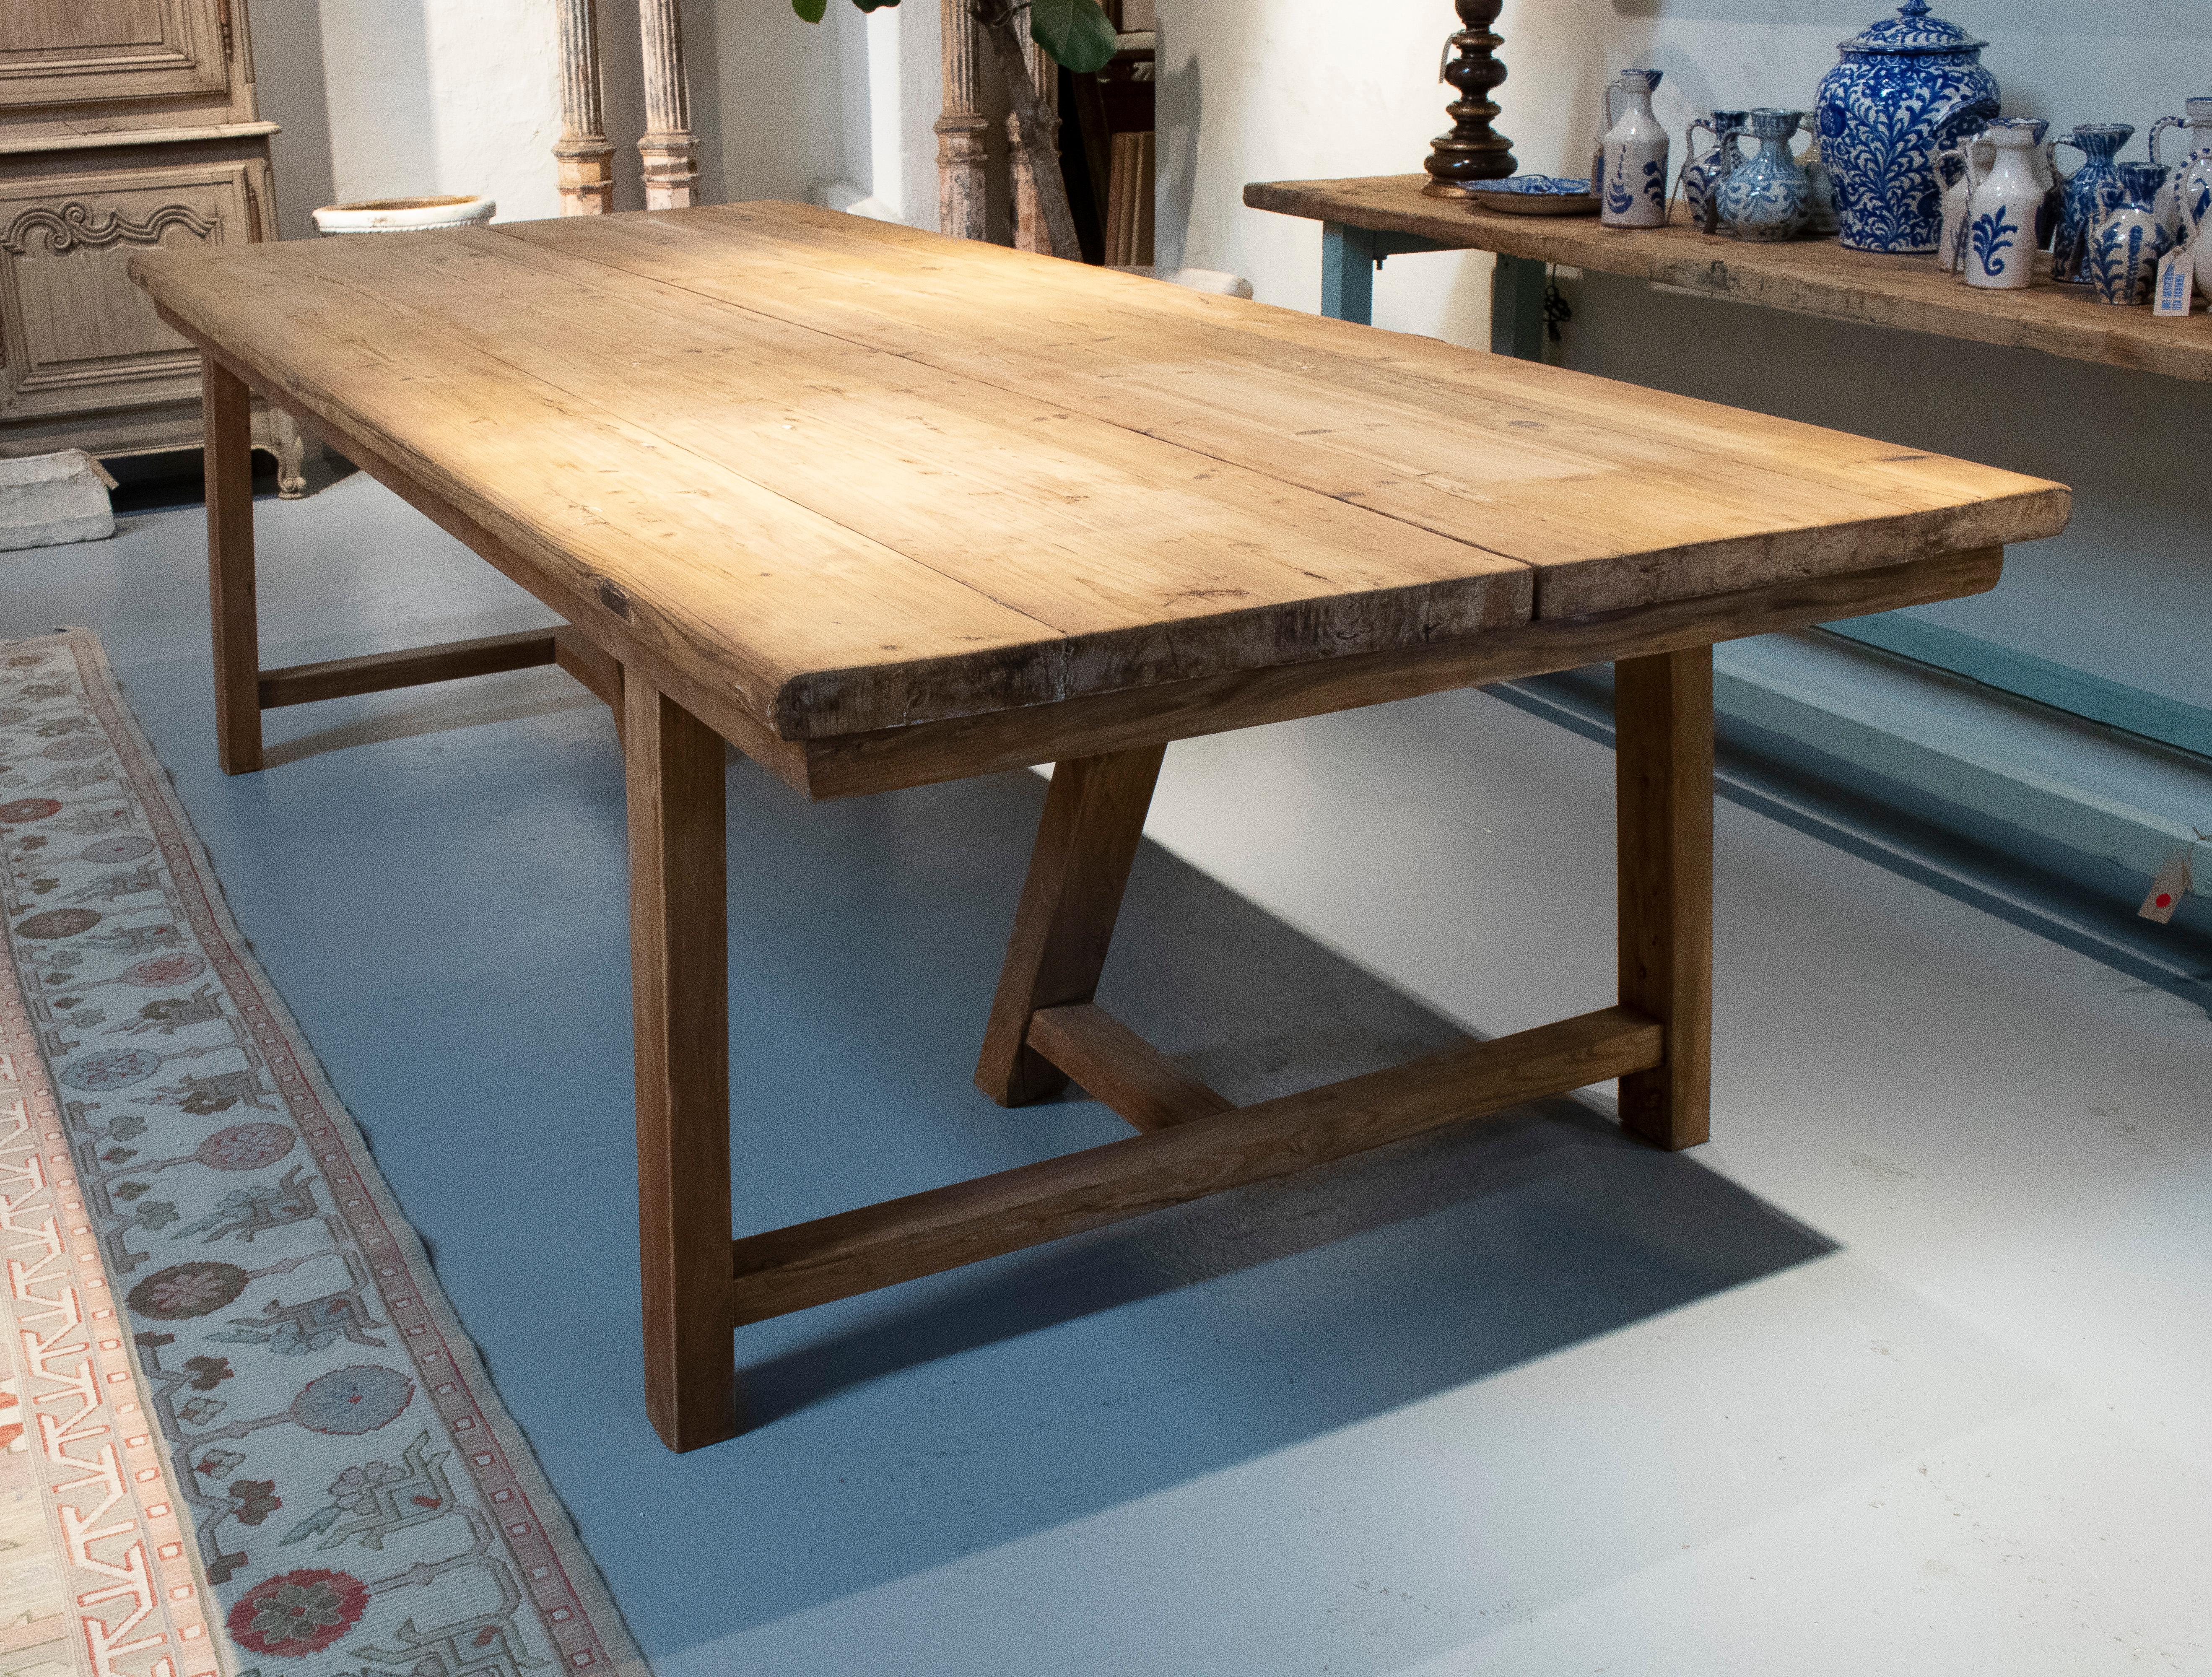 Rustic 1970s Spanish lime washed elm wood farmhouse dining table.